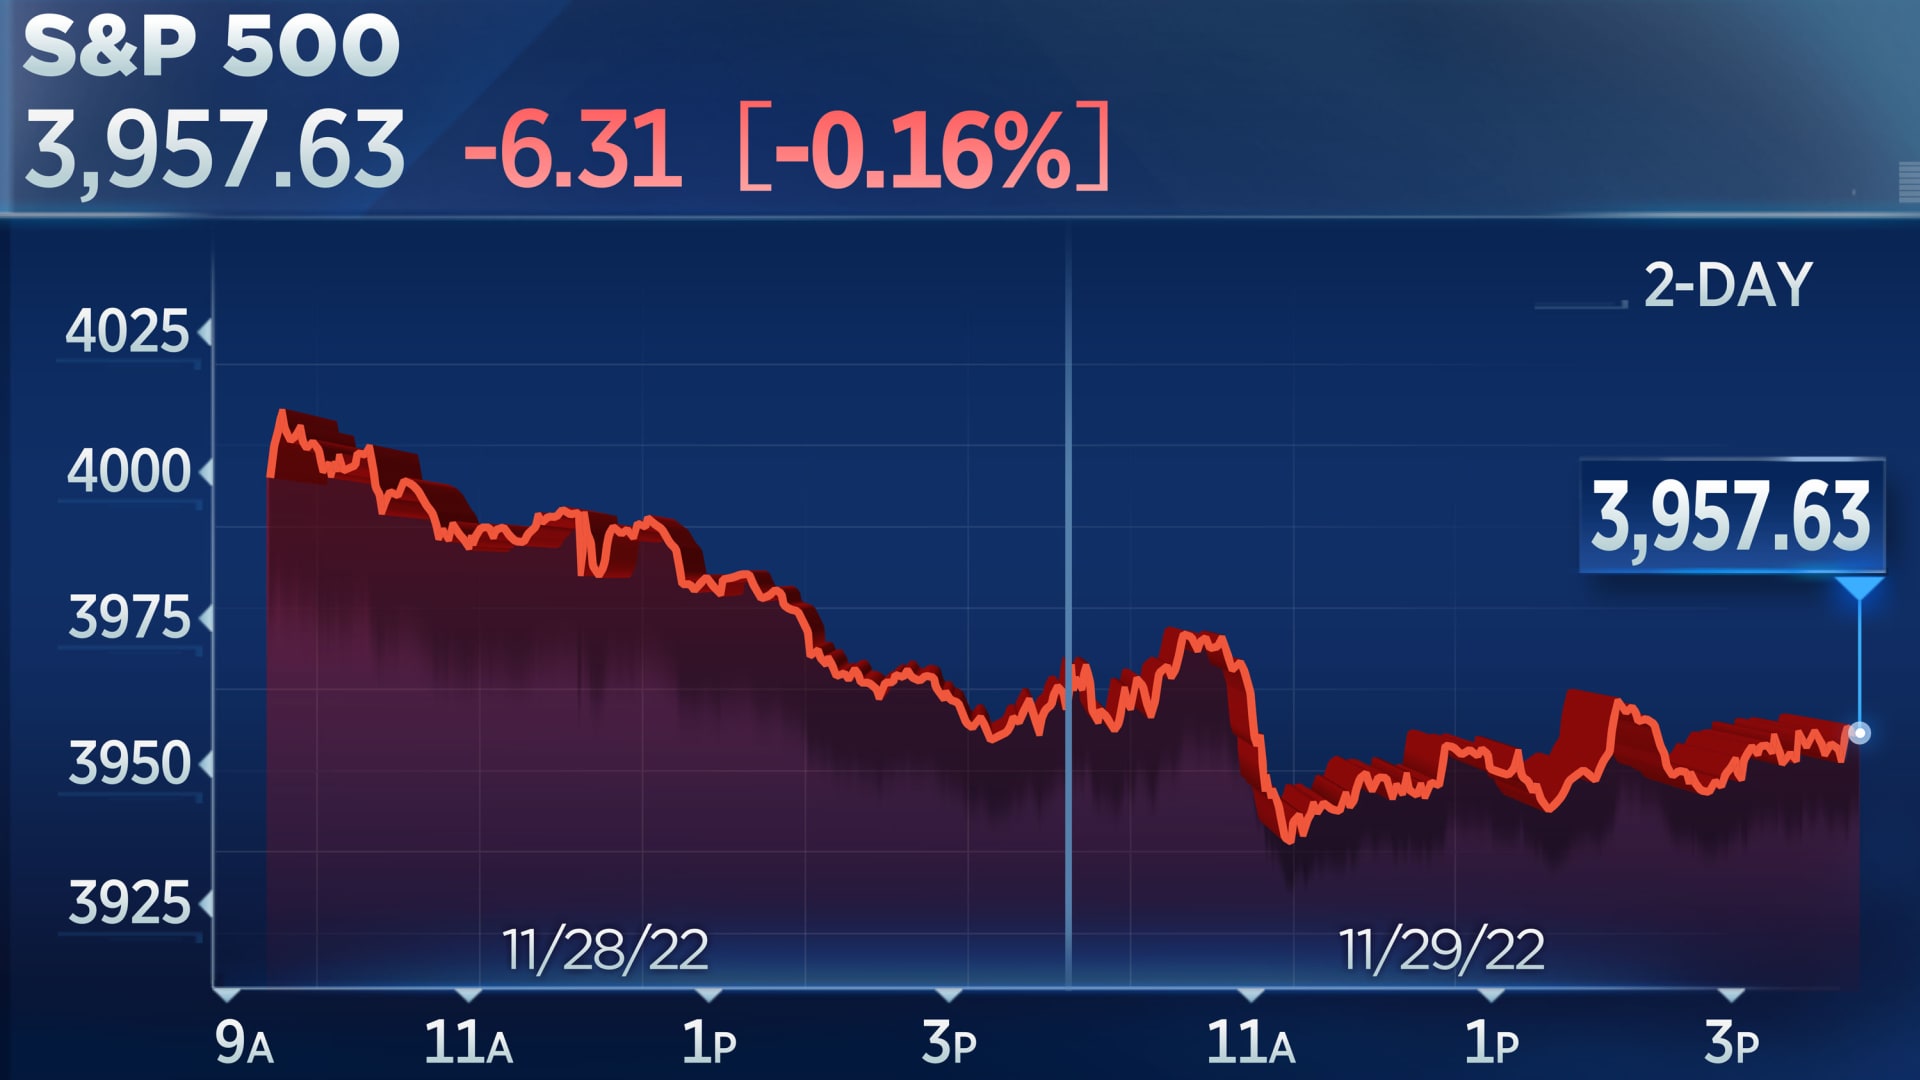 S&P 500 and Nasdaq close lower for third day as investors look to Fed Chair Powell's speech